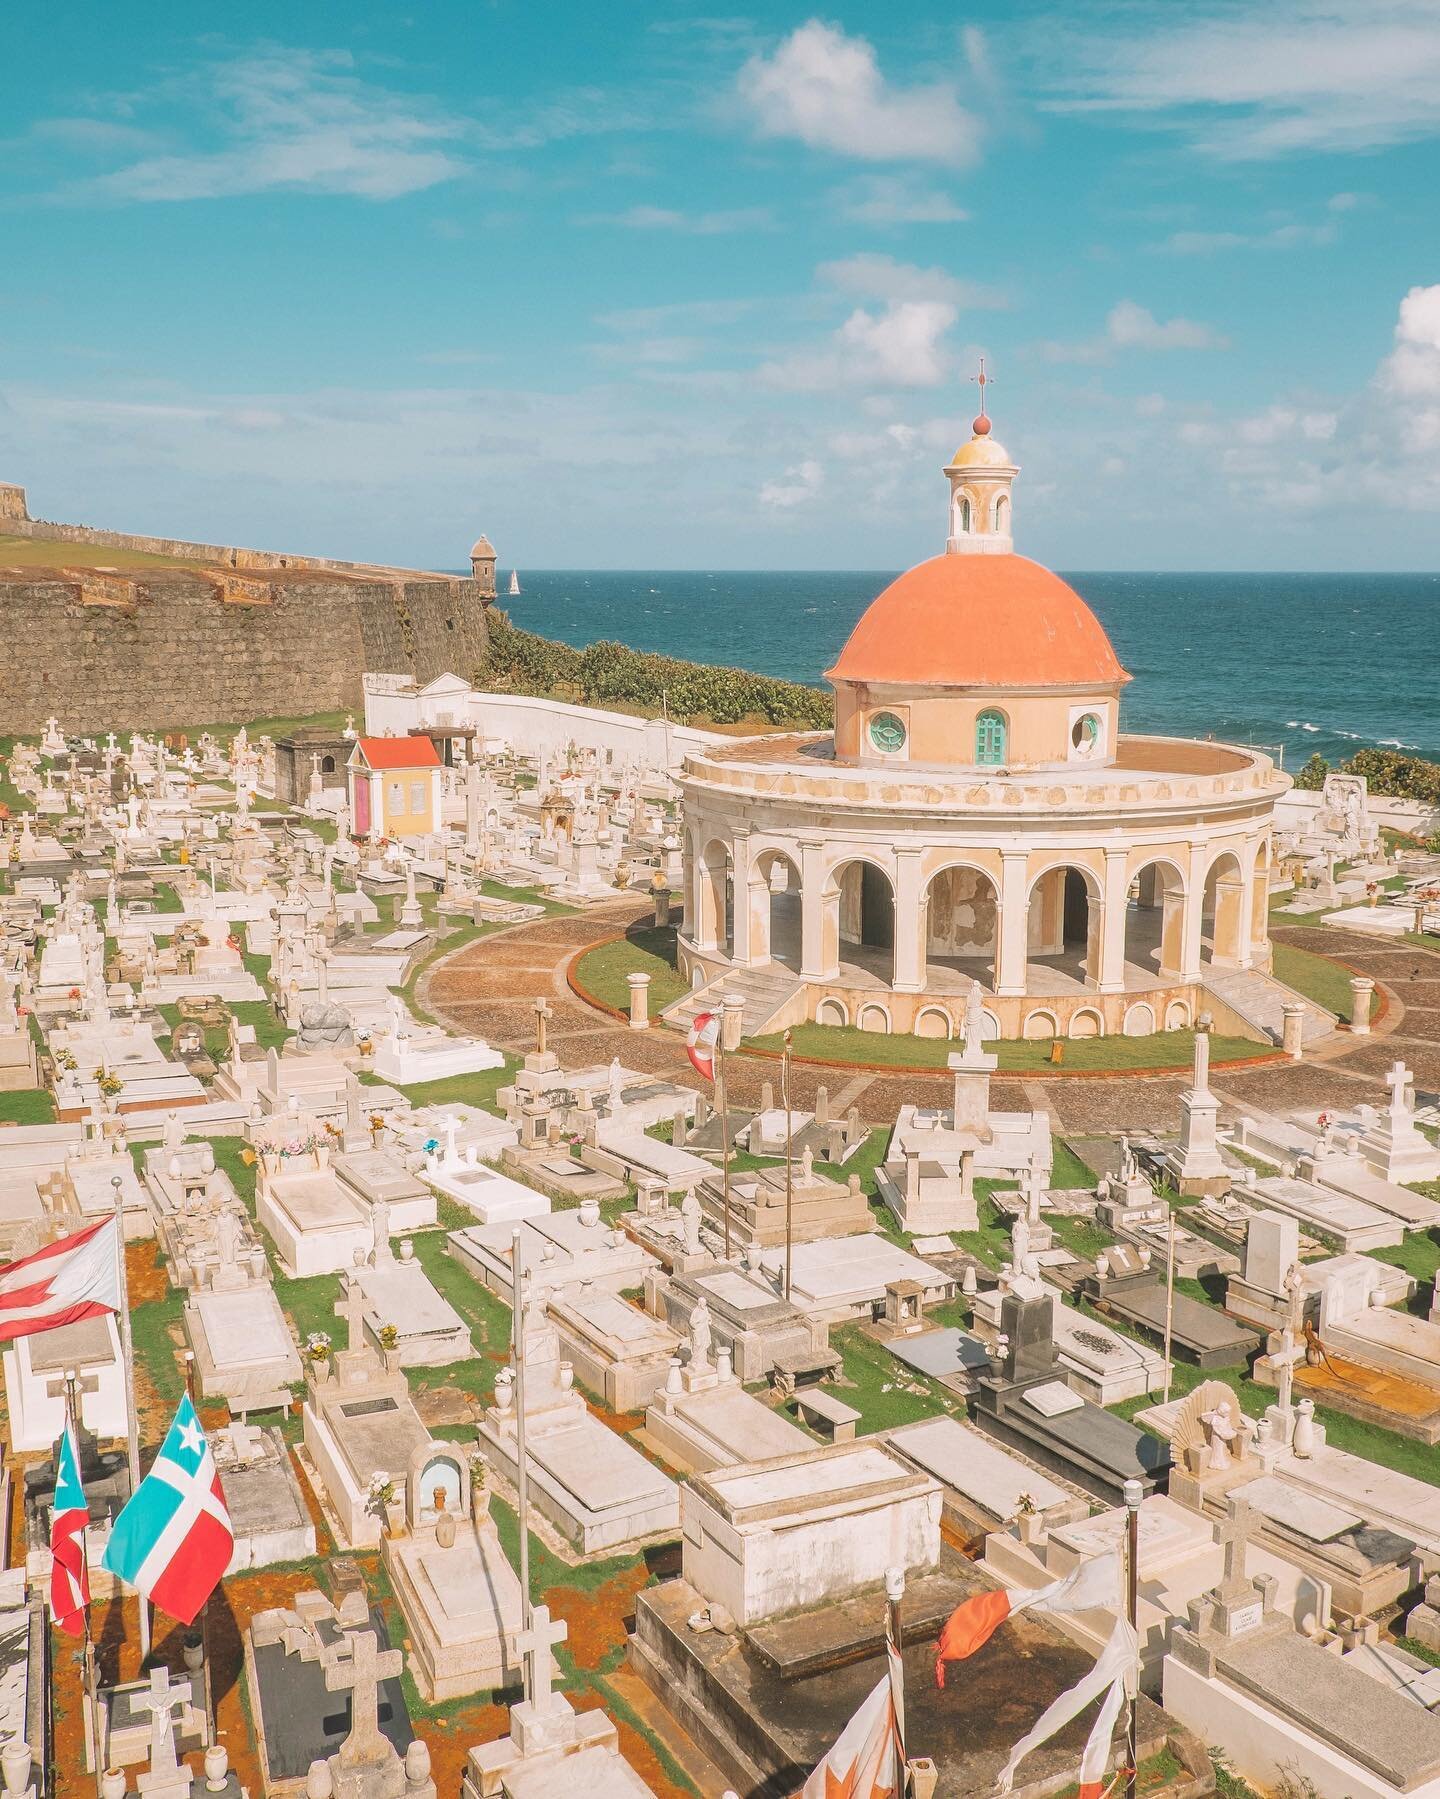 The old cemetery in San Juan is easily the most beautiful one I&rsquo;ve ever seen! Ornate tombstones and flying flags are all over this colonial era cemetery, all while sitting next to the ocean and right outside Fort San Felipe del Morro. &bull;&bu